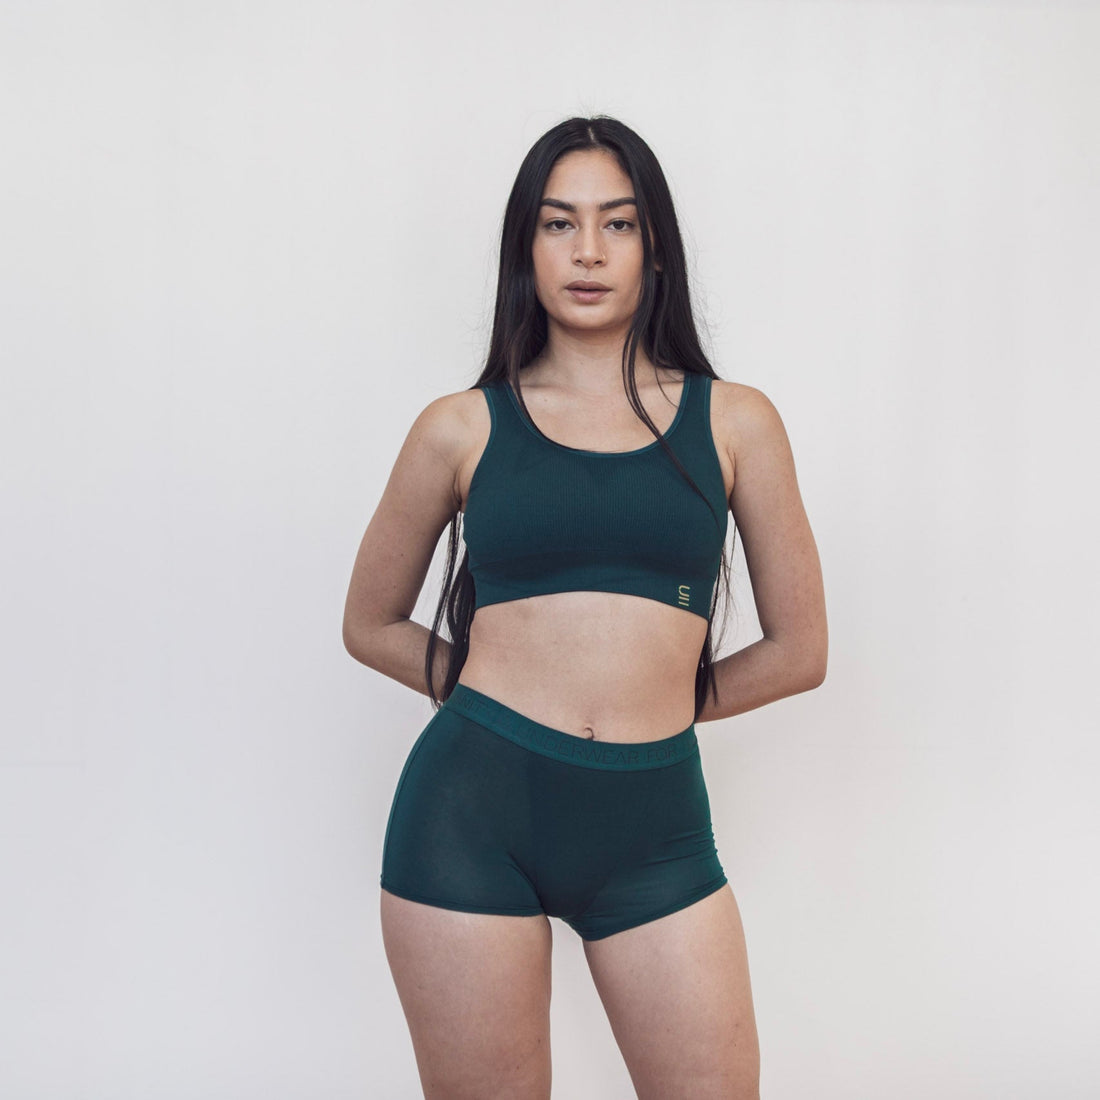 Sustainable, ethically produced atlantis shorts by Underwear for Humanity. Mid-rise, full coverage seat, thin, no-dig, elastic waist, short length sits higher on the leg. Made from sustainable tencel and recycled elastic. Models wear the shorts. 